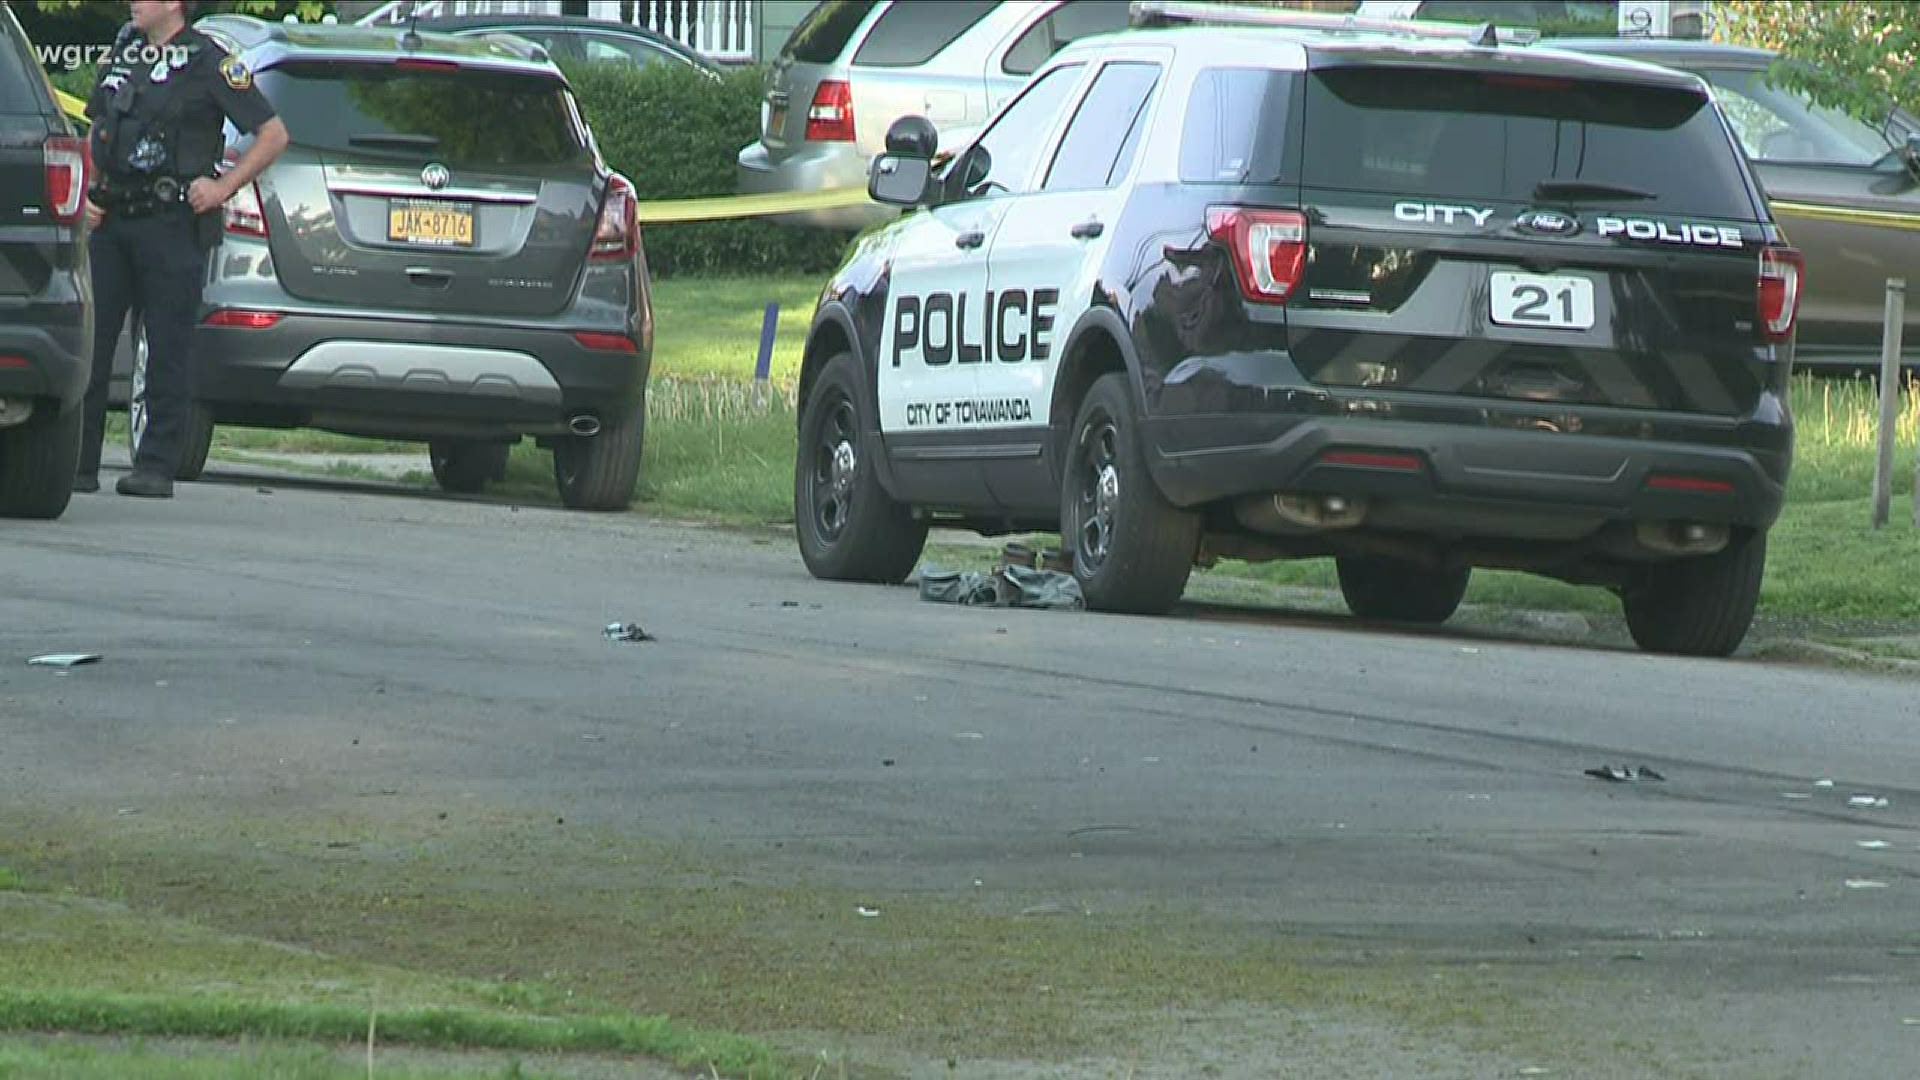 A small city is shaken up after a man opened fire not once, but twice. The second time it was on a group of police officers in the City of Tonawanda.